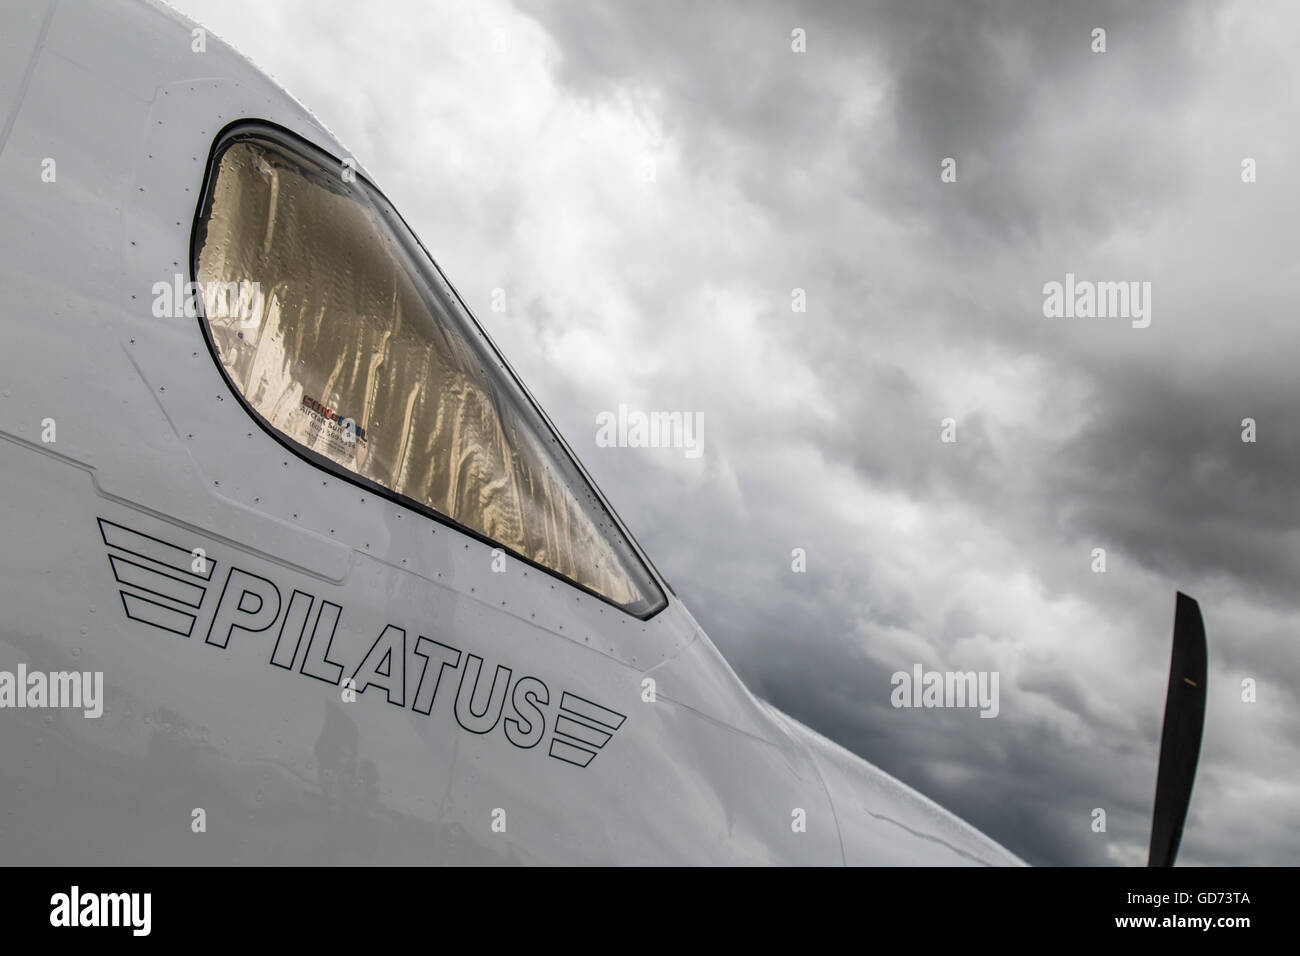 Outside shot of the cabin of a Pilatus PC-12/47 aircraft, with storm clouds overhead. Stock Photo